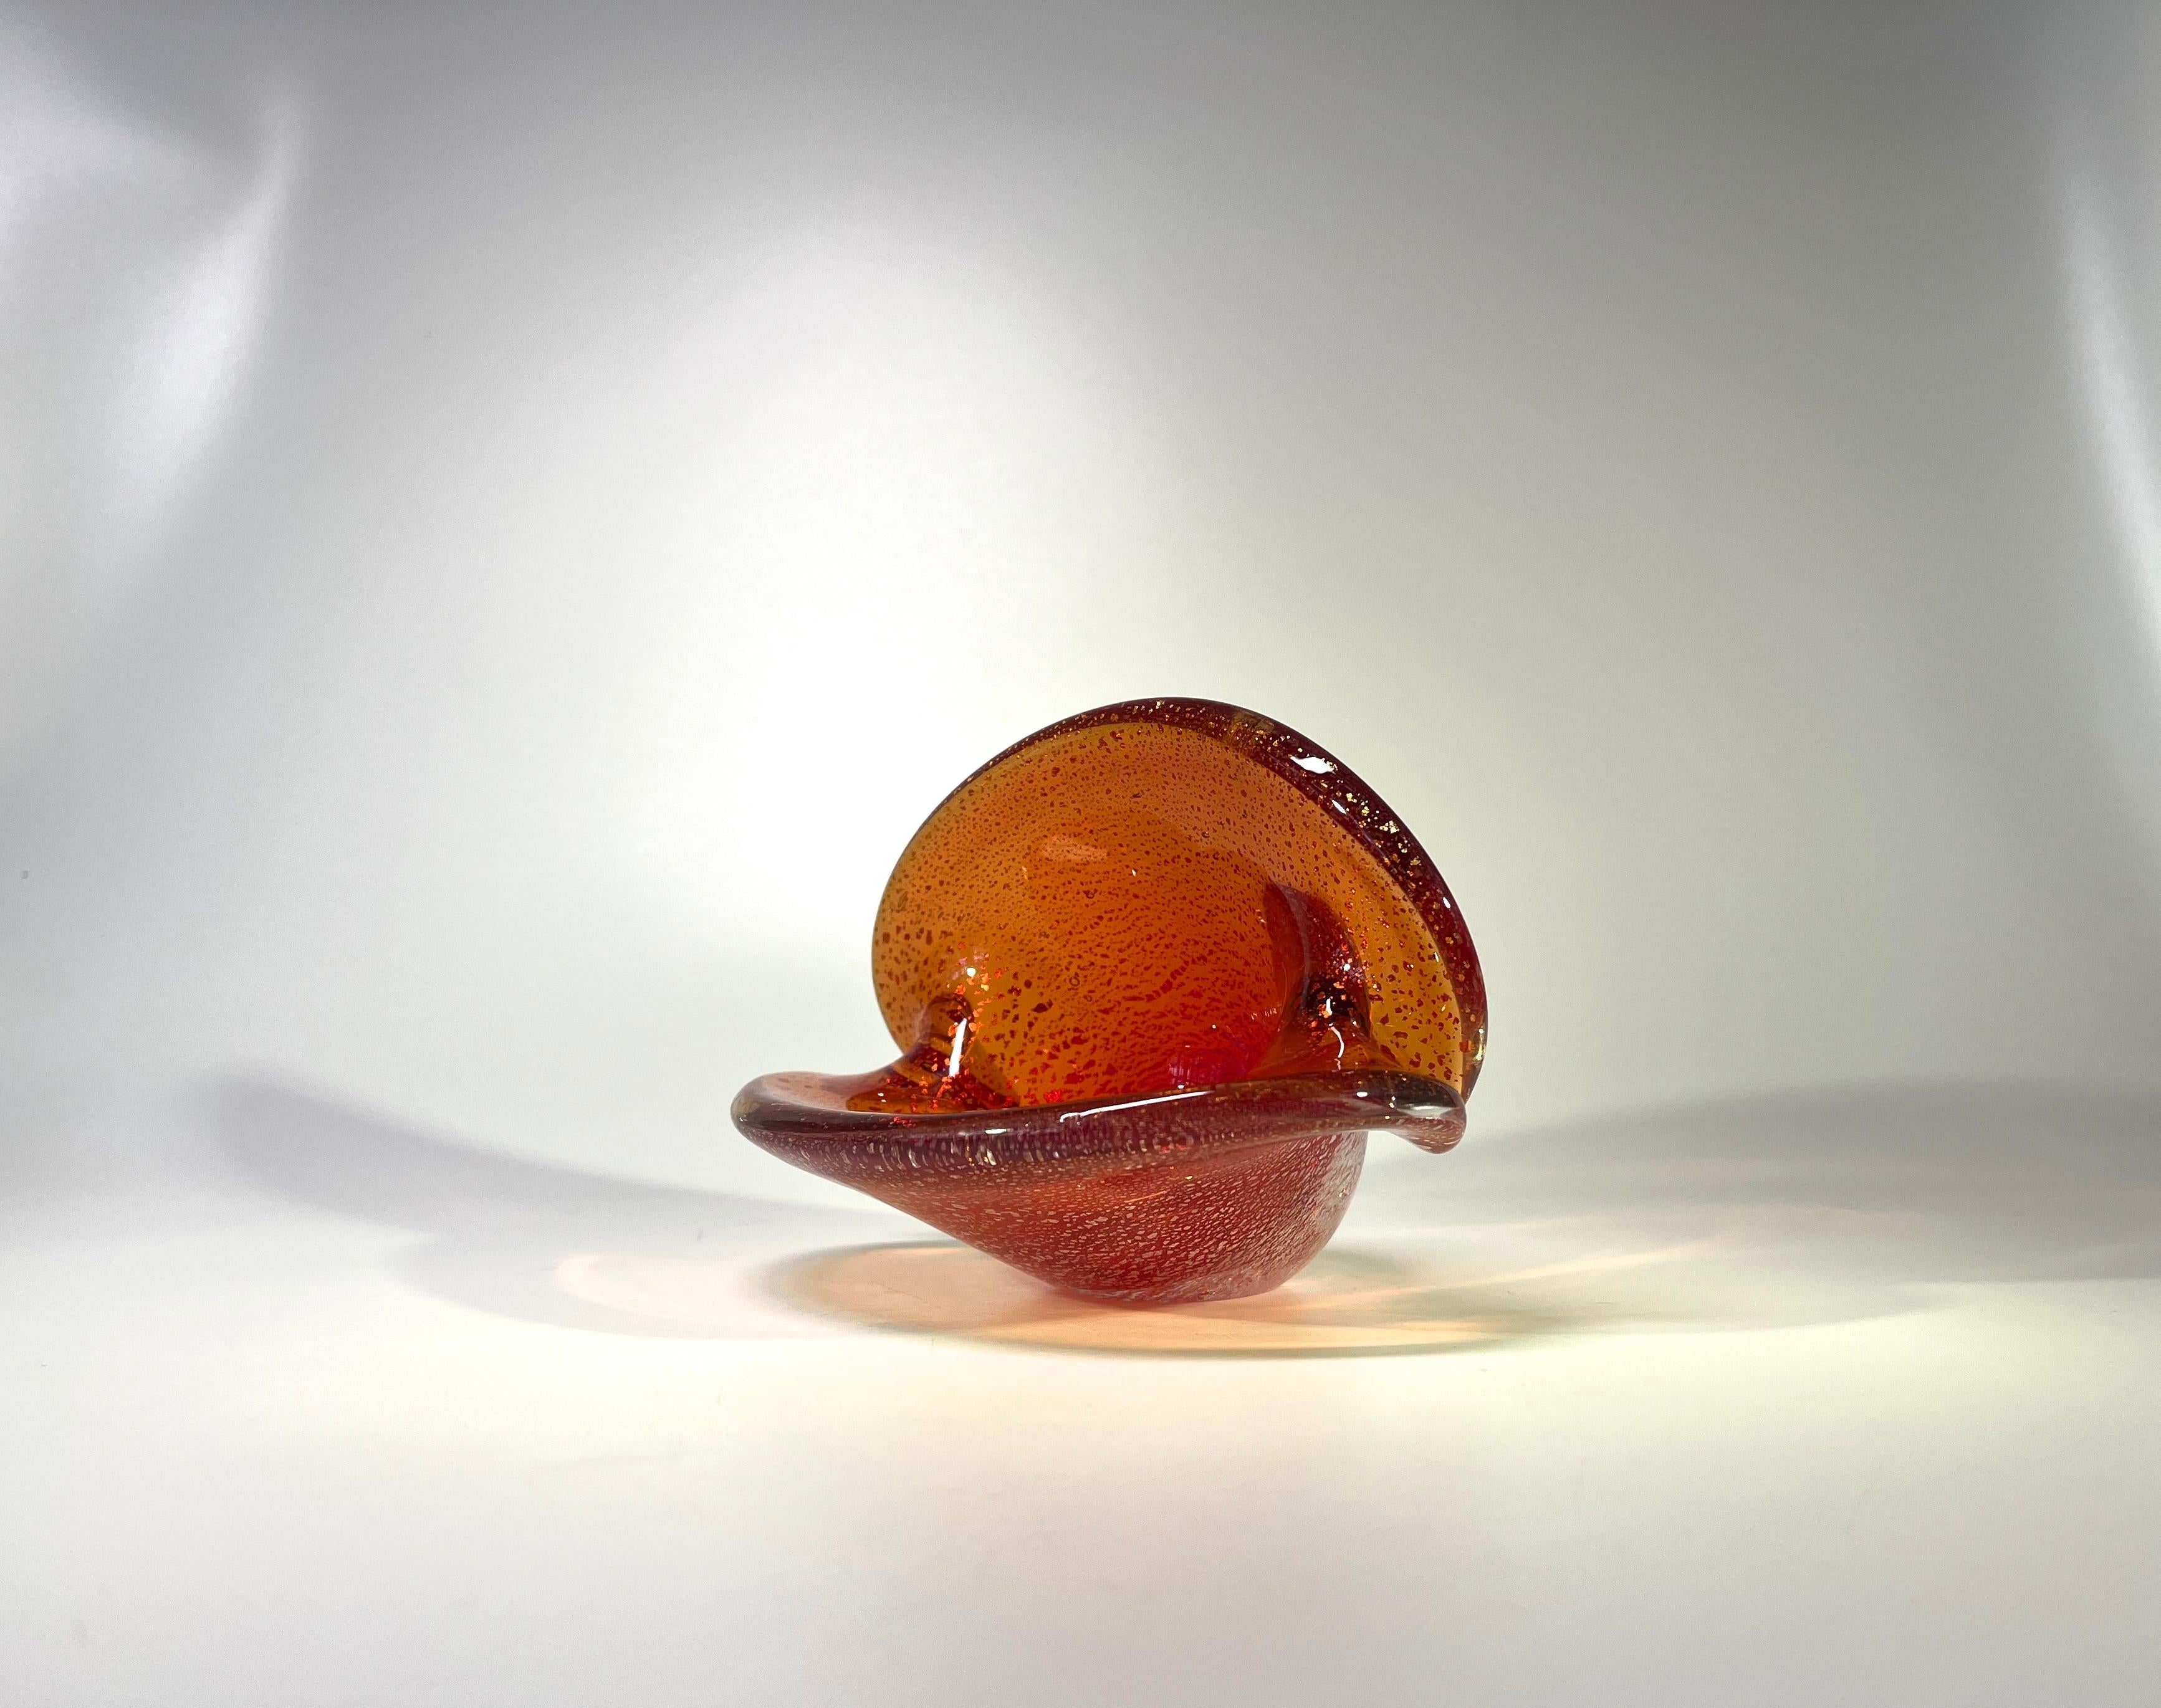 Beautiful hand crafted liquid amber clam shell vase, smothered with light reflecting shards of silver  
Attributed to by the renowned glass artist factory Seguso, Murano, Italy
This piece can be displayed either vertically or horizontally
Circa